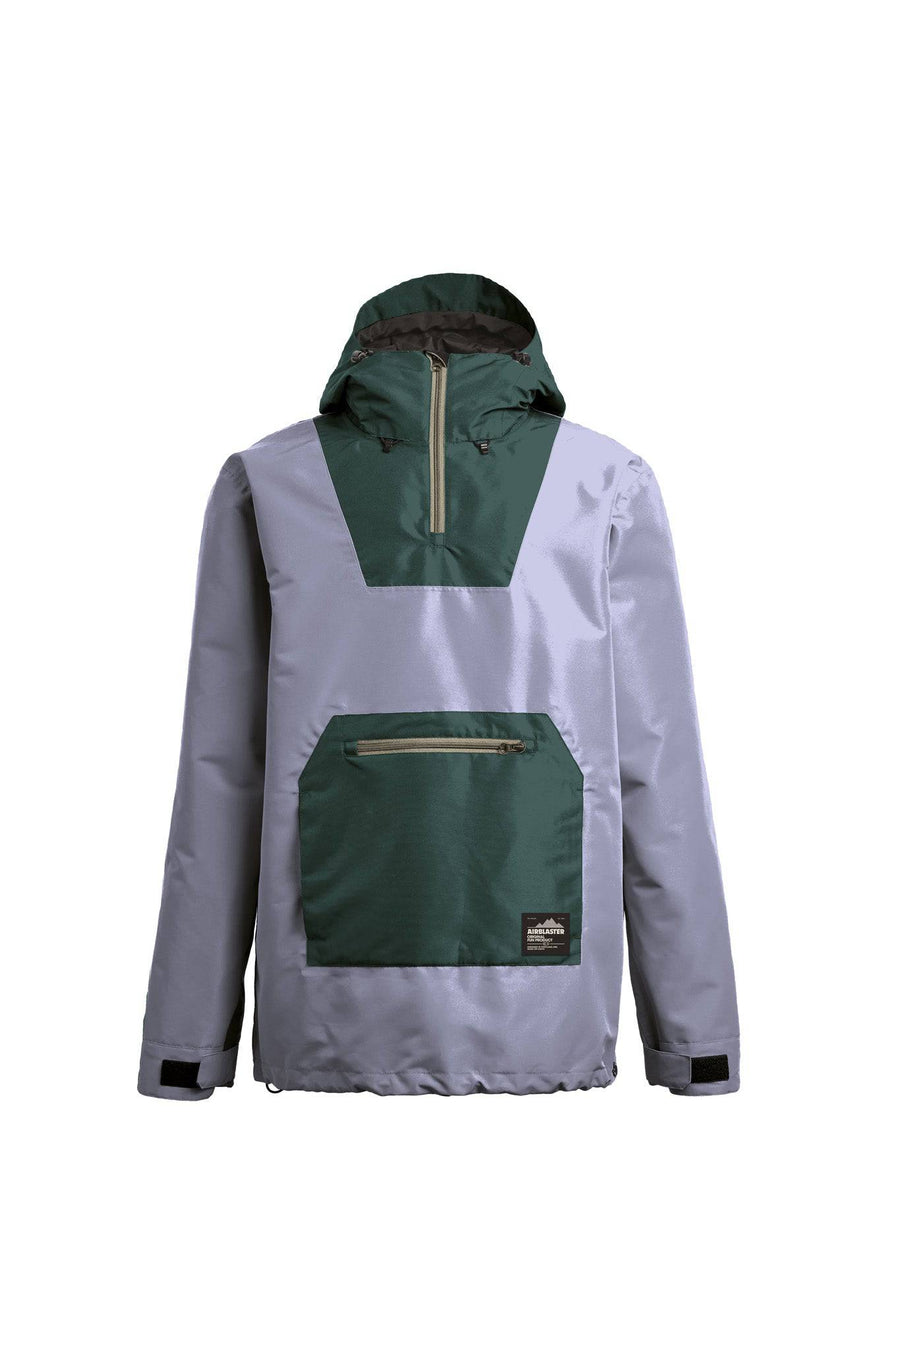 2022 Airblaster Freedom Pullover Snow Jacket in Lavender Spruce